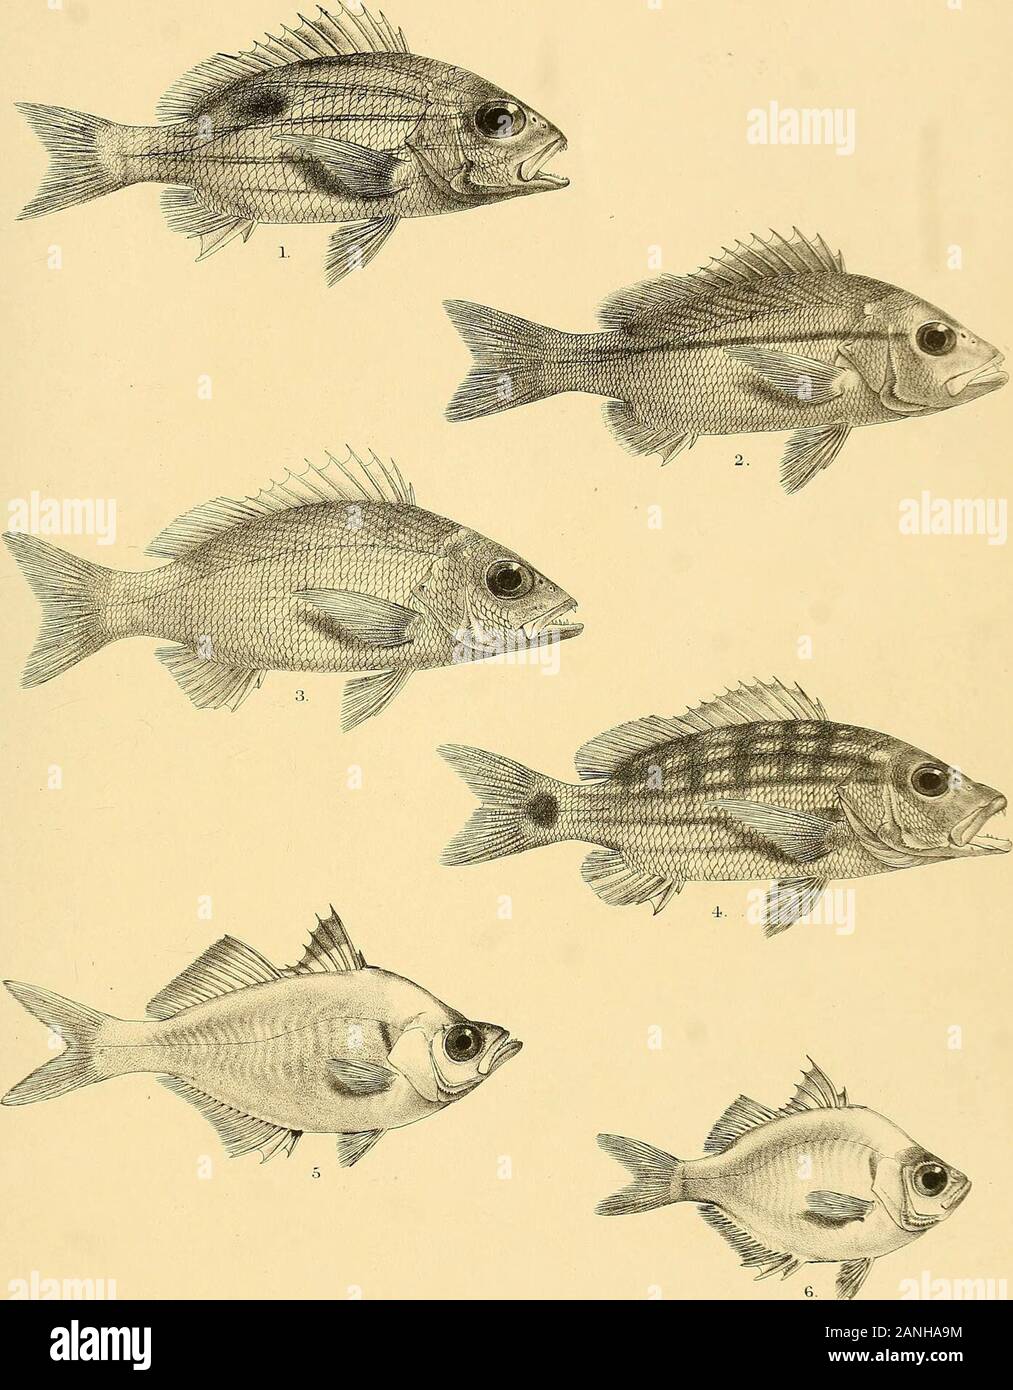 The fishes of India; being a natural history of the fishes known to inhabit the seas and fresh waters of India, Burma, and Ceylon . GHFcrd del. J P.Kng Mi Mmifim Bros /imp. l.LUTIANUS JOHNII. 2.L. GIBBUS (ADULT.) 3. L. GIBBUS (YOUNG.) 4, L. BOHAR. 5. L..MARG1NATUS. 6.L.YAP1LLI. Days Fishes of India. ?^- XT,. r-1 del KMmtern Kth. LLUTIANUS QUINQUELINEARIS. 2, L.VITTA. 3. L.MADRAS. 4, L.DECUSSATUS 5.AMBASSIS NAMA. 6, A. RANGA. ifintsni 3r:; sm Days Fishes of India. Plate XV. Stock Photo